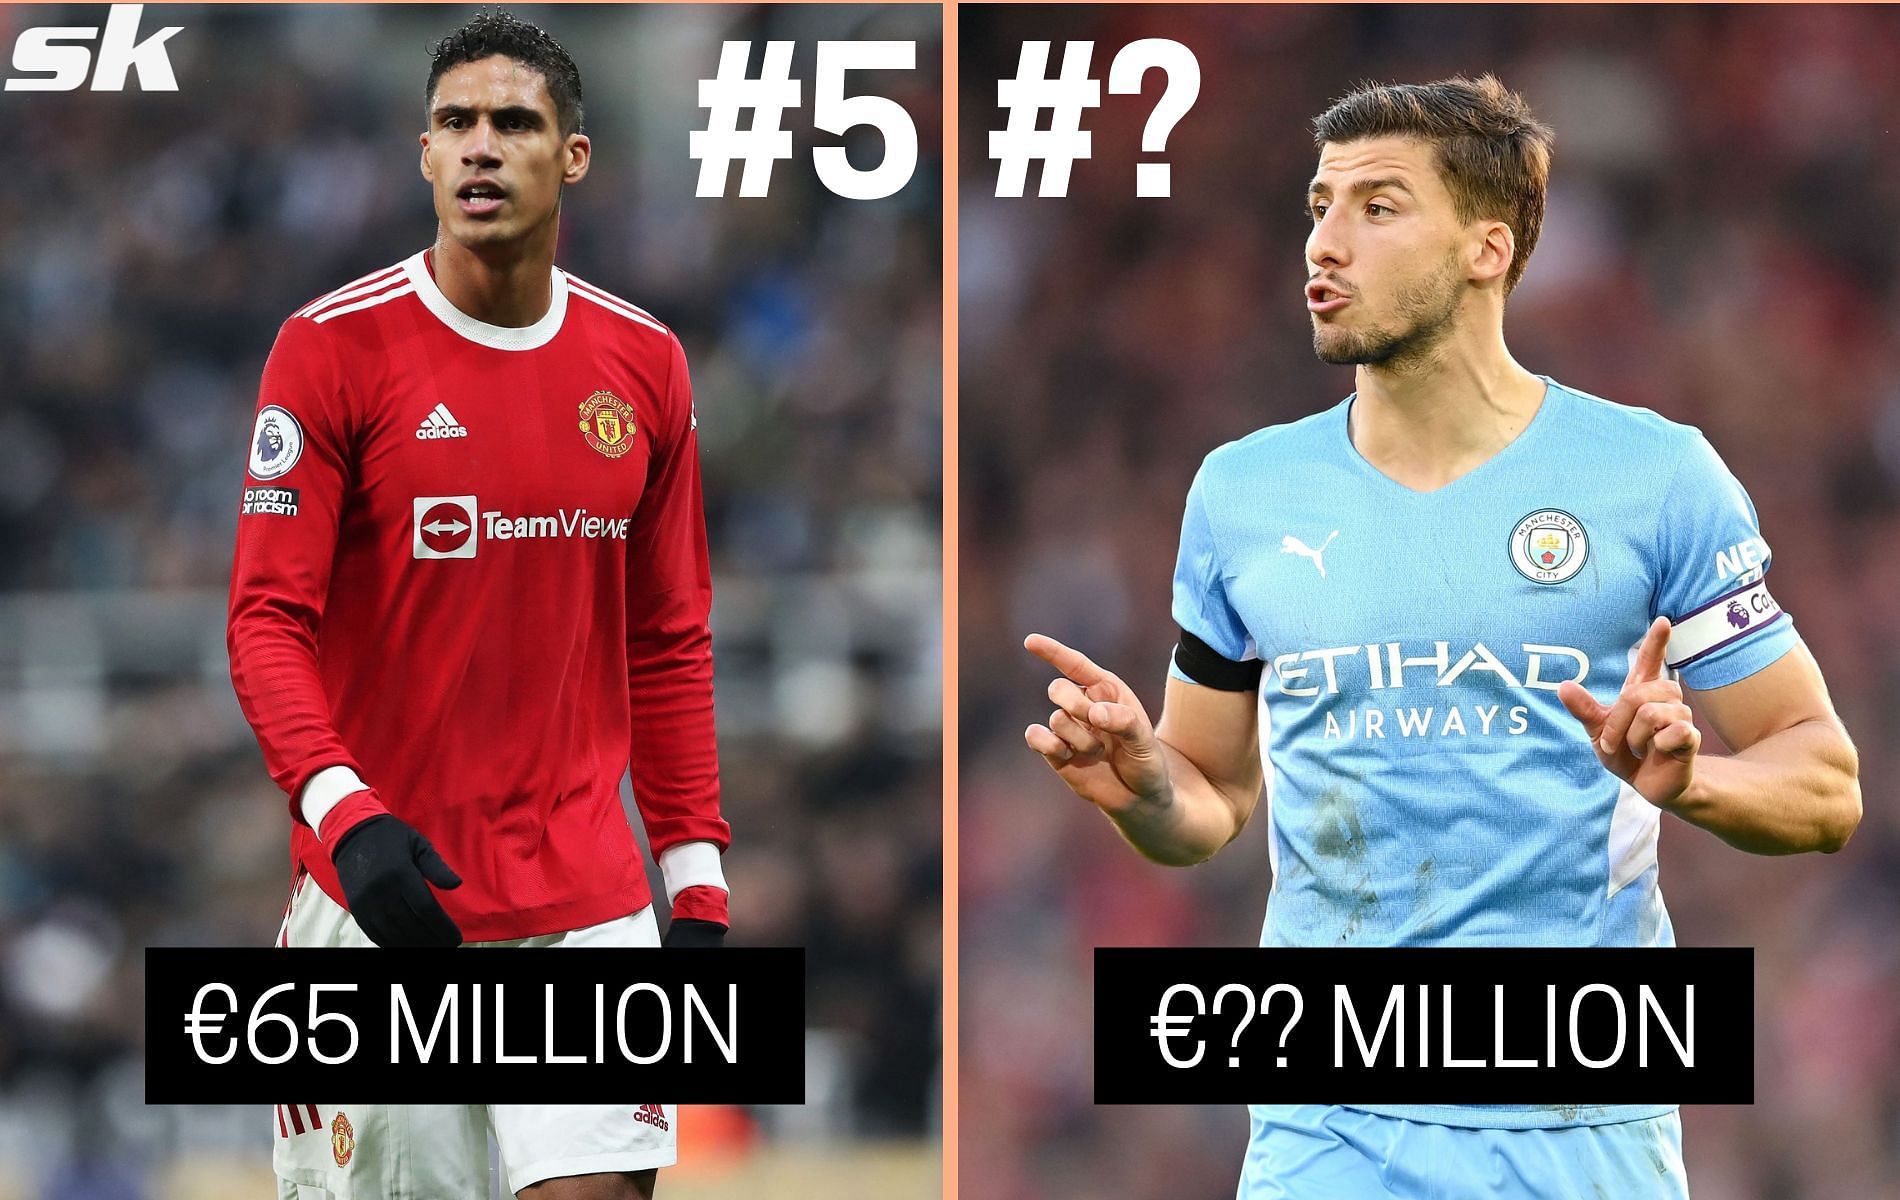 The Premier League has some of the most valuable centre-backs right now